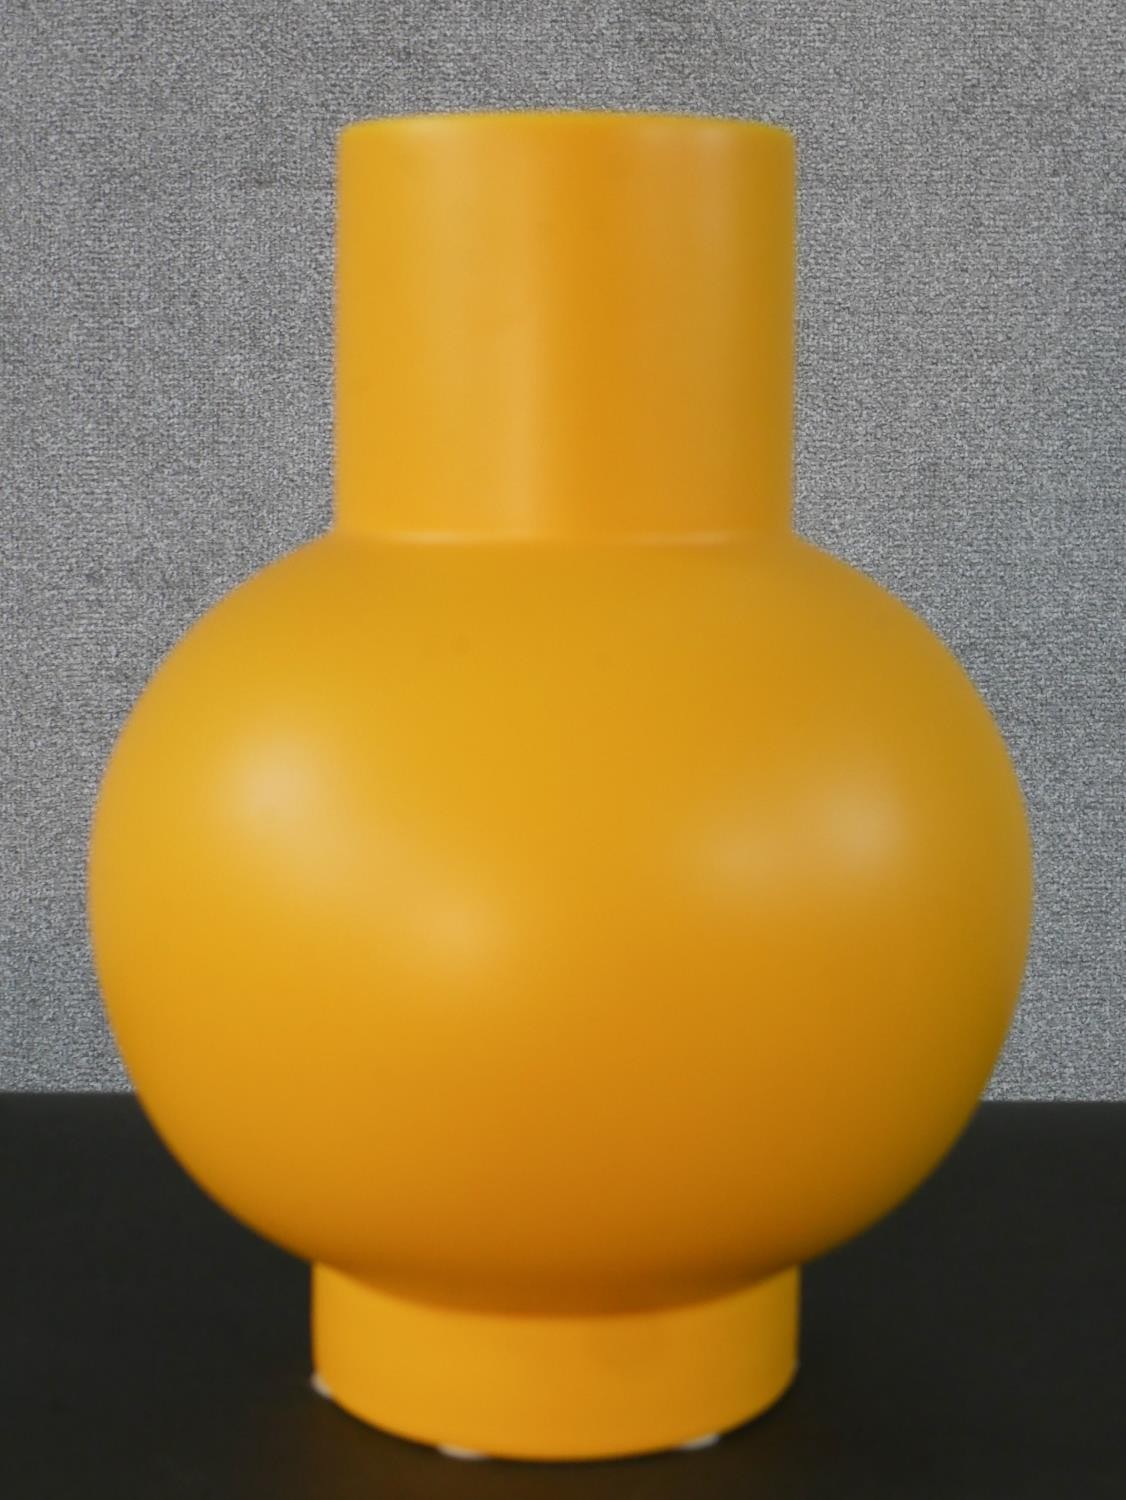 A RAAWII Yellow Strøm large earthenware vase designed by Nicholai Wiig-Hansen, printed mark to base.